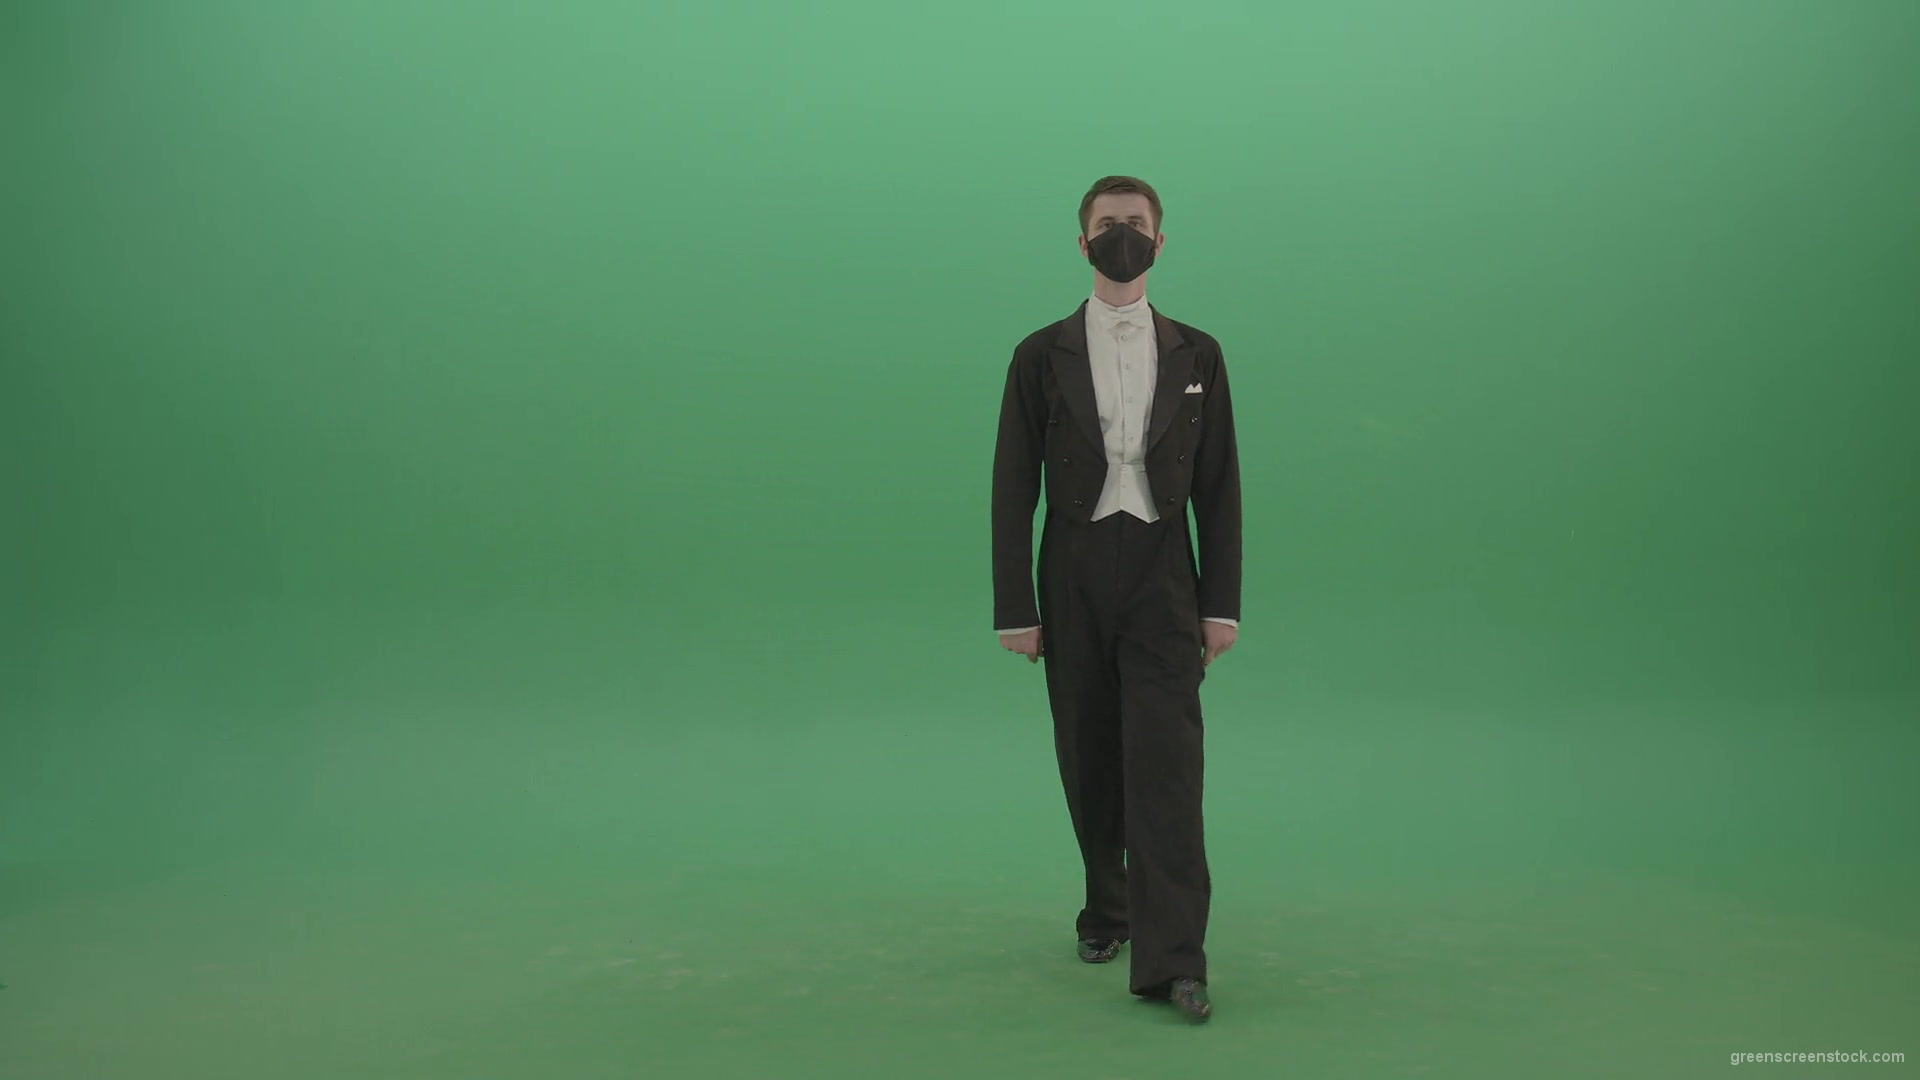 Man-in-Classical-ballroom-suite-making-wish-regards-to-impres-audience-in-black-medicine-mask-on-green-screen-4K-Video-Footage-1920_009 Green Screen Stock